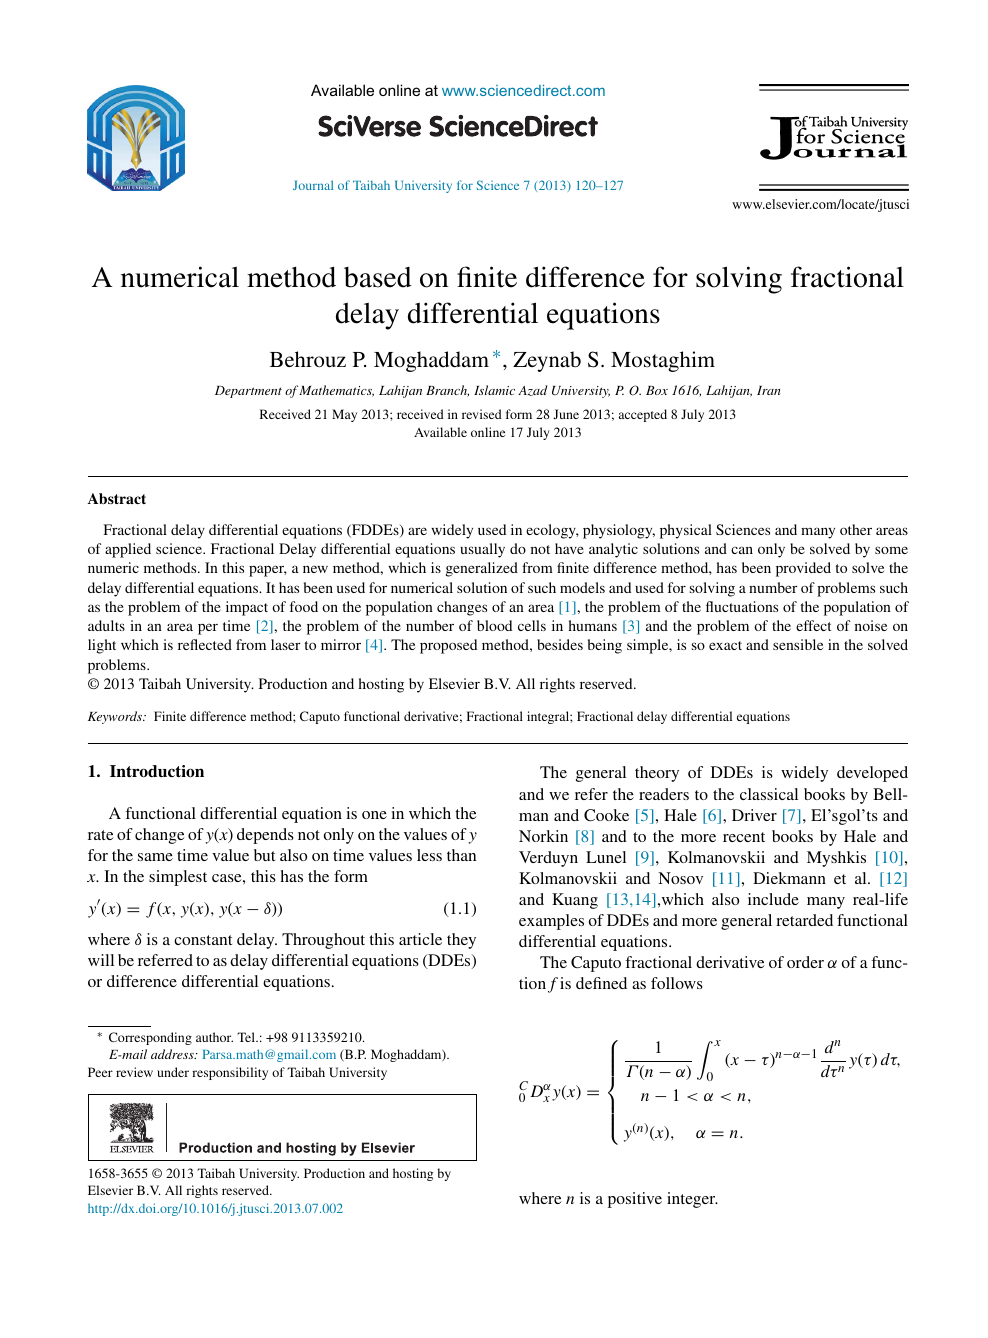 A Numerical Method Based On Finite Difference For Solving Fractional Delay Differential Equations Topic Of Research Paper In Mathematics Download Scholarly Article Pdf And Read For Free On Cyberleninka Open Science